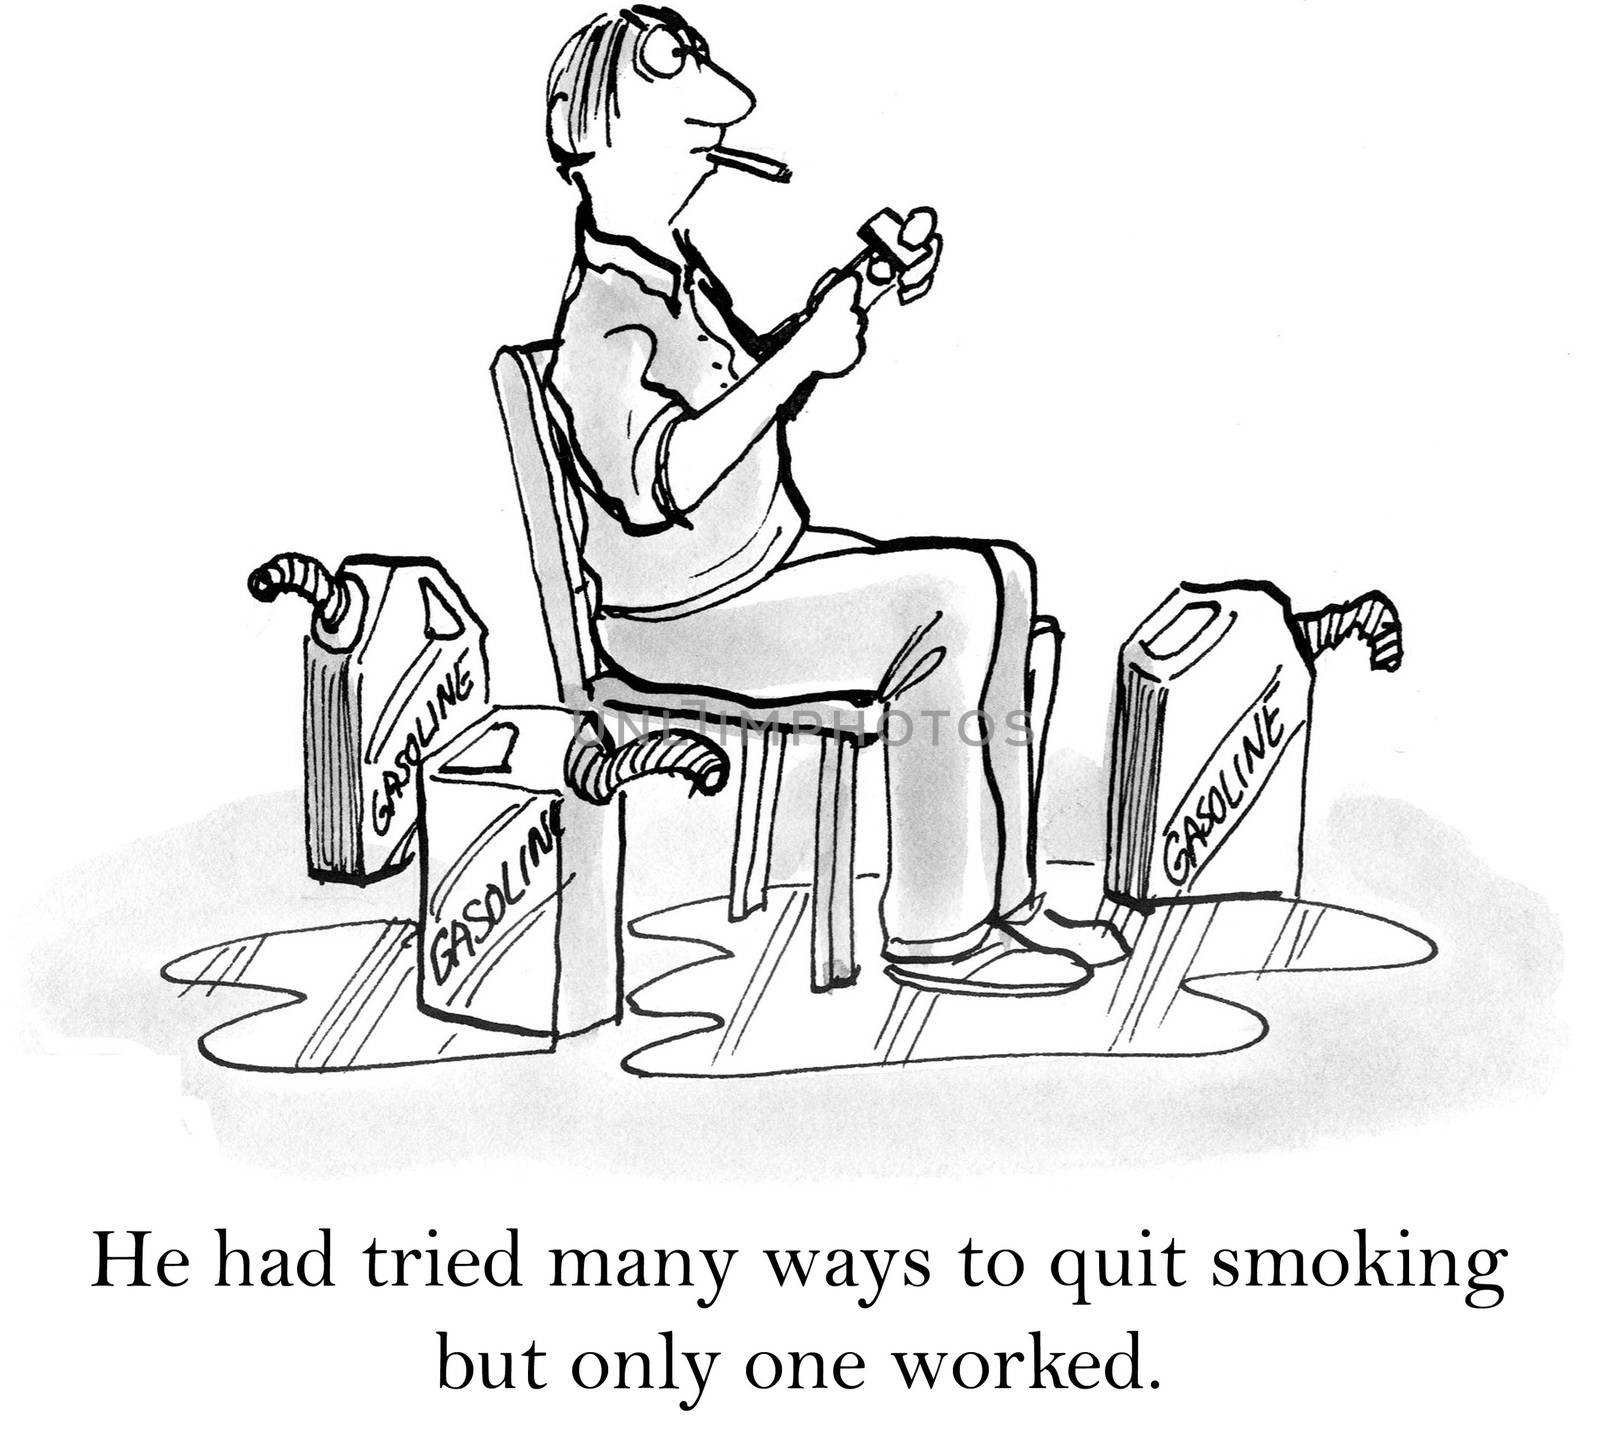 Man has tried everything to quit smoking and can't so he comes to a disastrous conclusion.